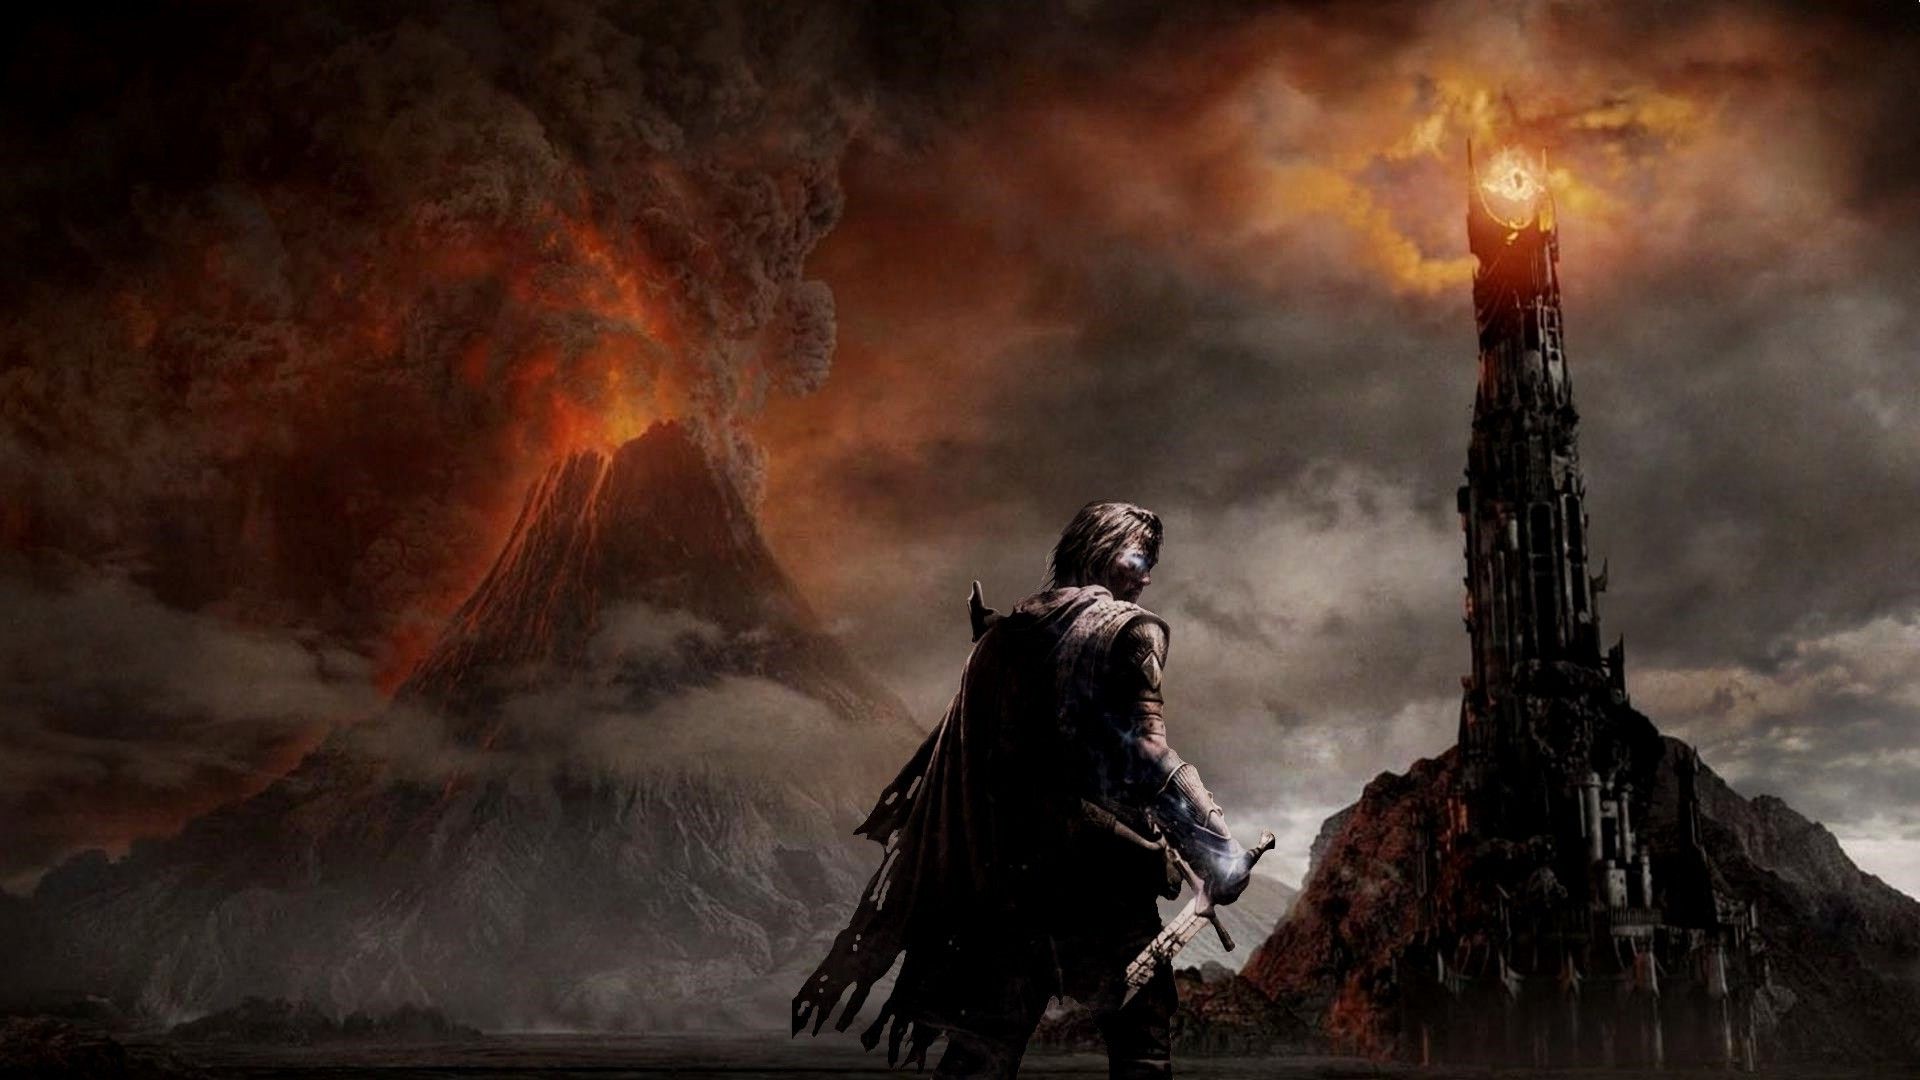 1920x1080 shadow of mordor mordor the eye of sauron mountain lava the lord of the rings wallpaper JPG 221 kB